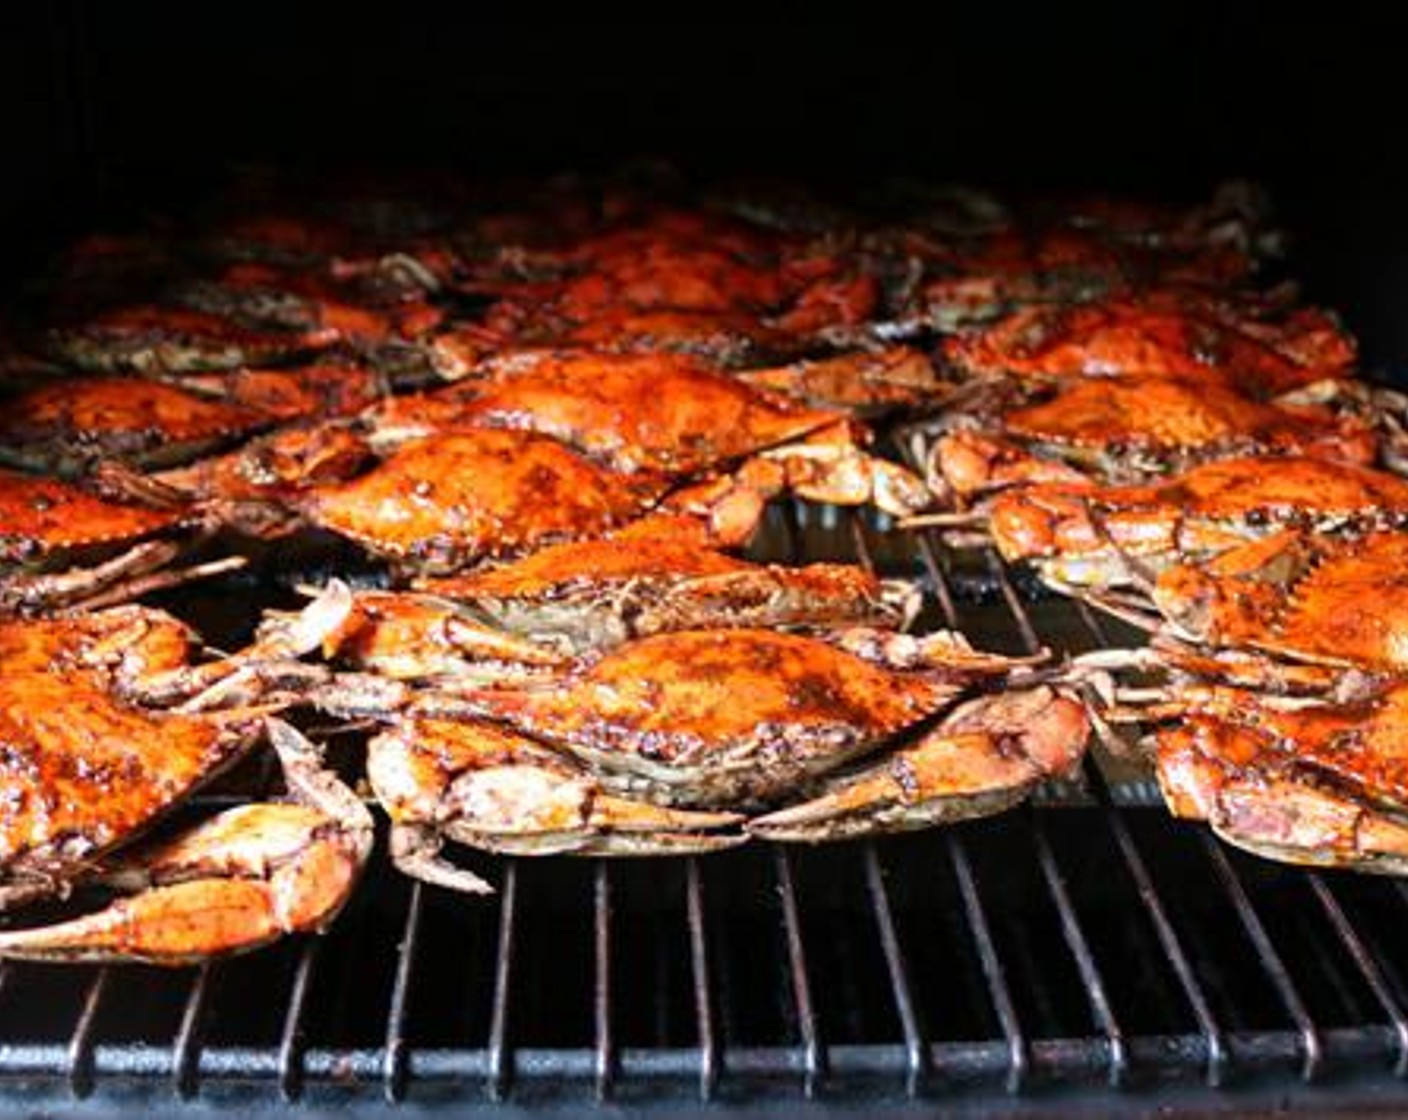 step 4 Arrange Steamed Blue Crabs (24) on cooking grate and smoke for 15 Minutes.